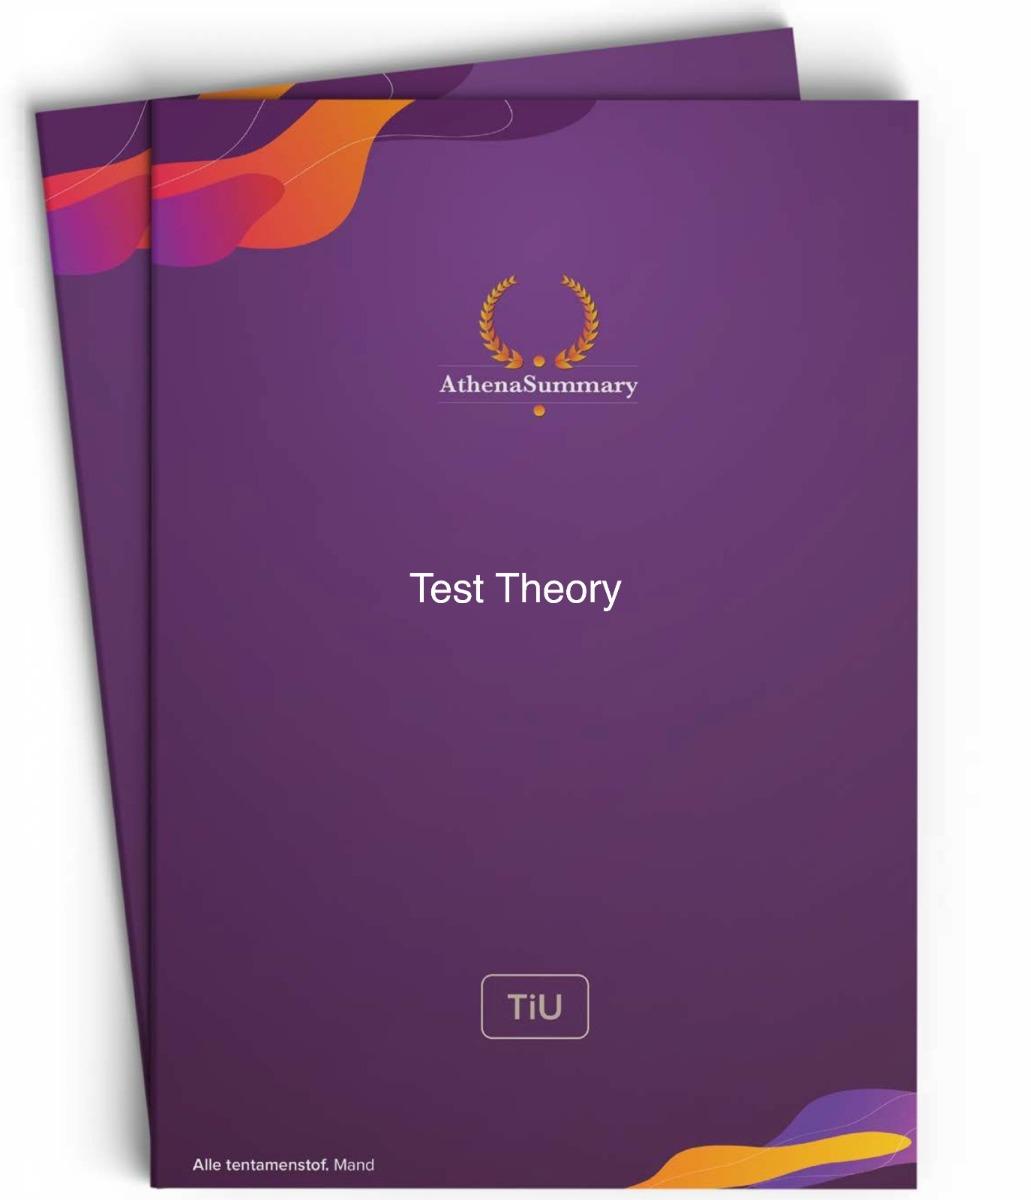 Literature & Lecture Summary: Test Theory